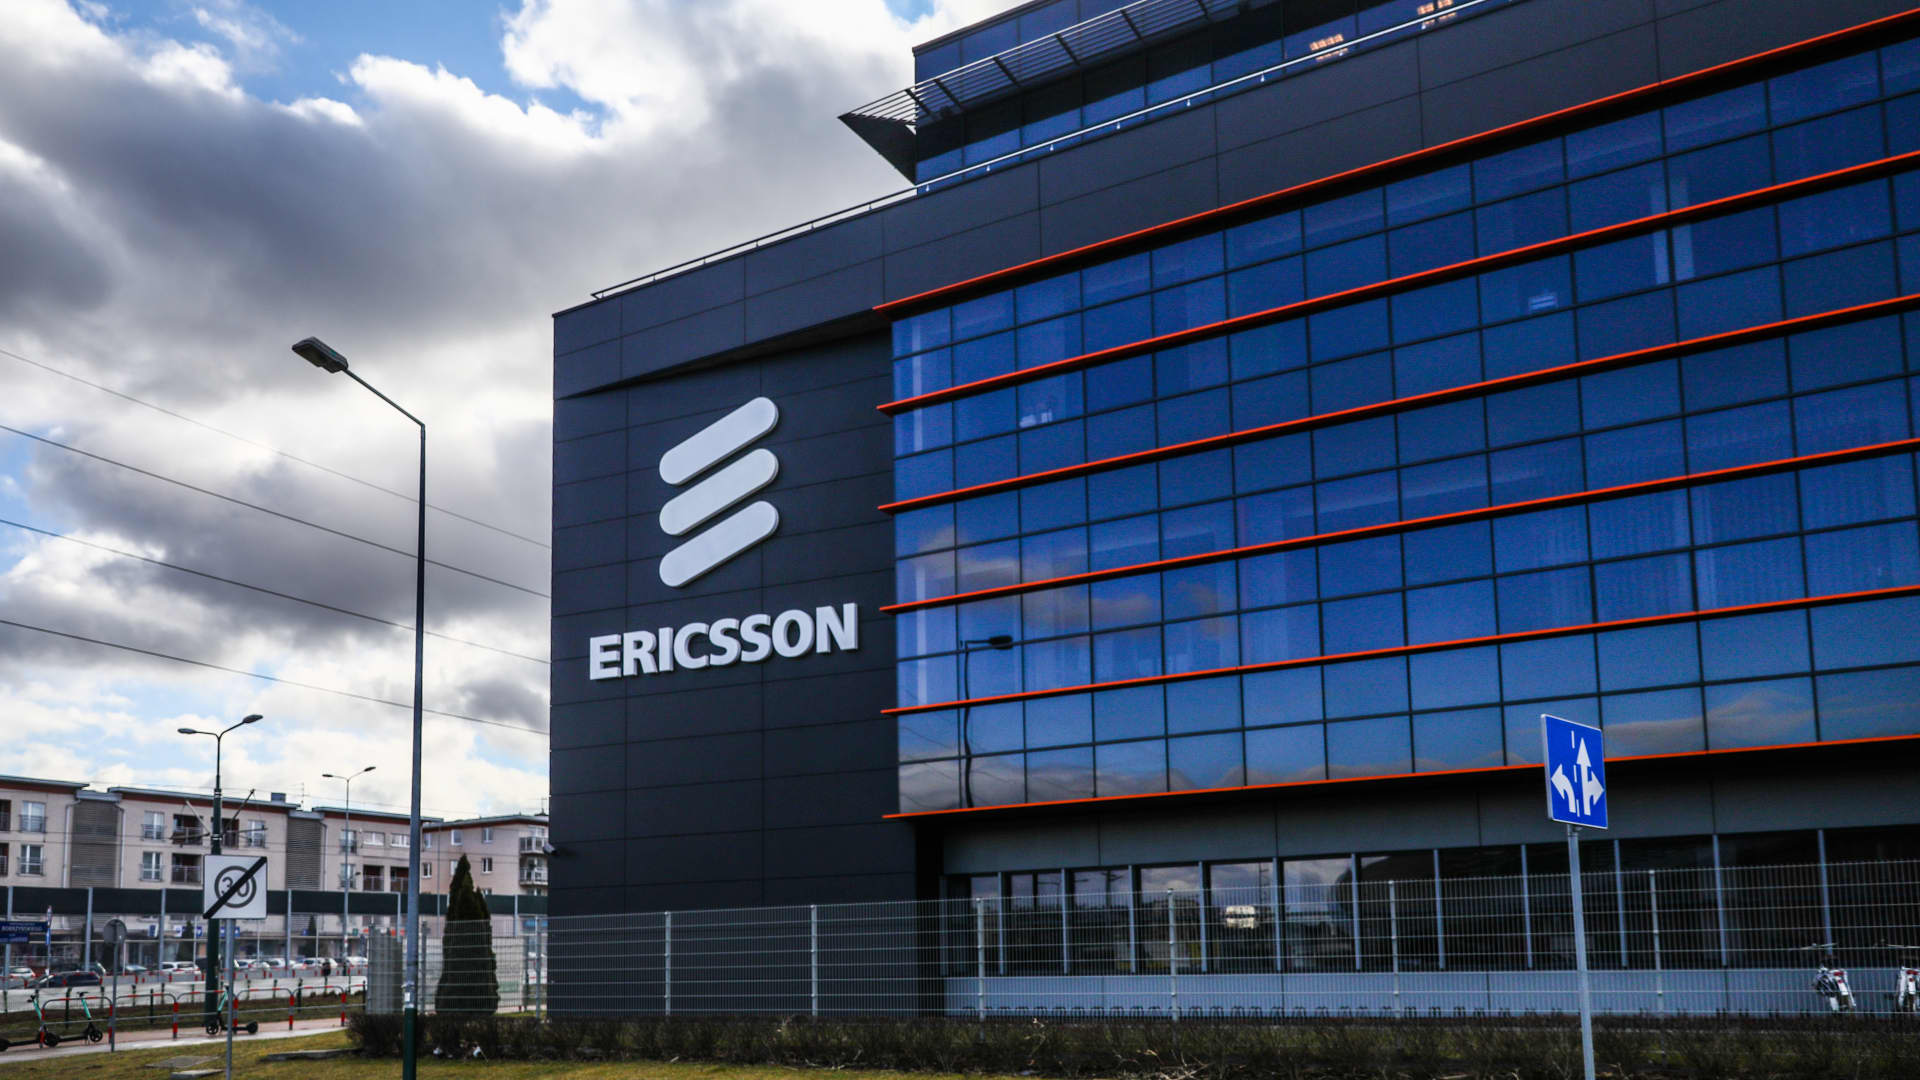 Ericsson CEO says Europe's telecom industry is probably unsustainable